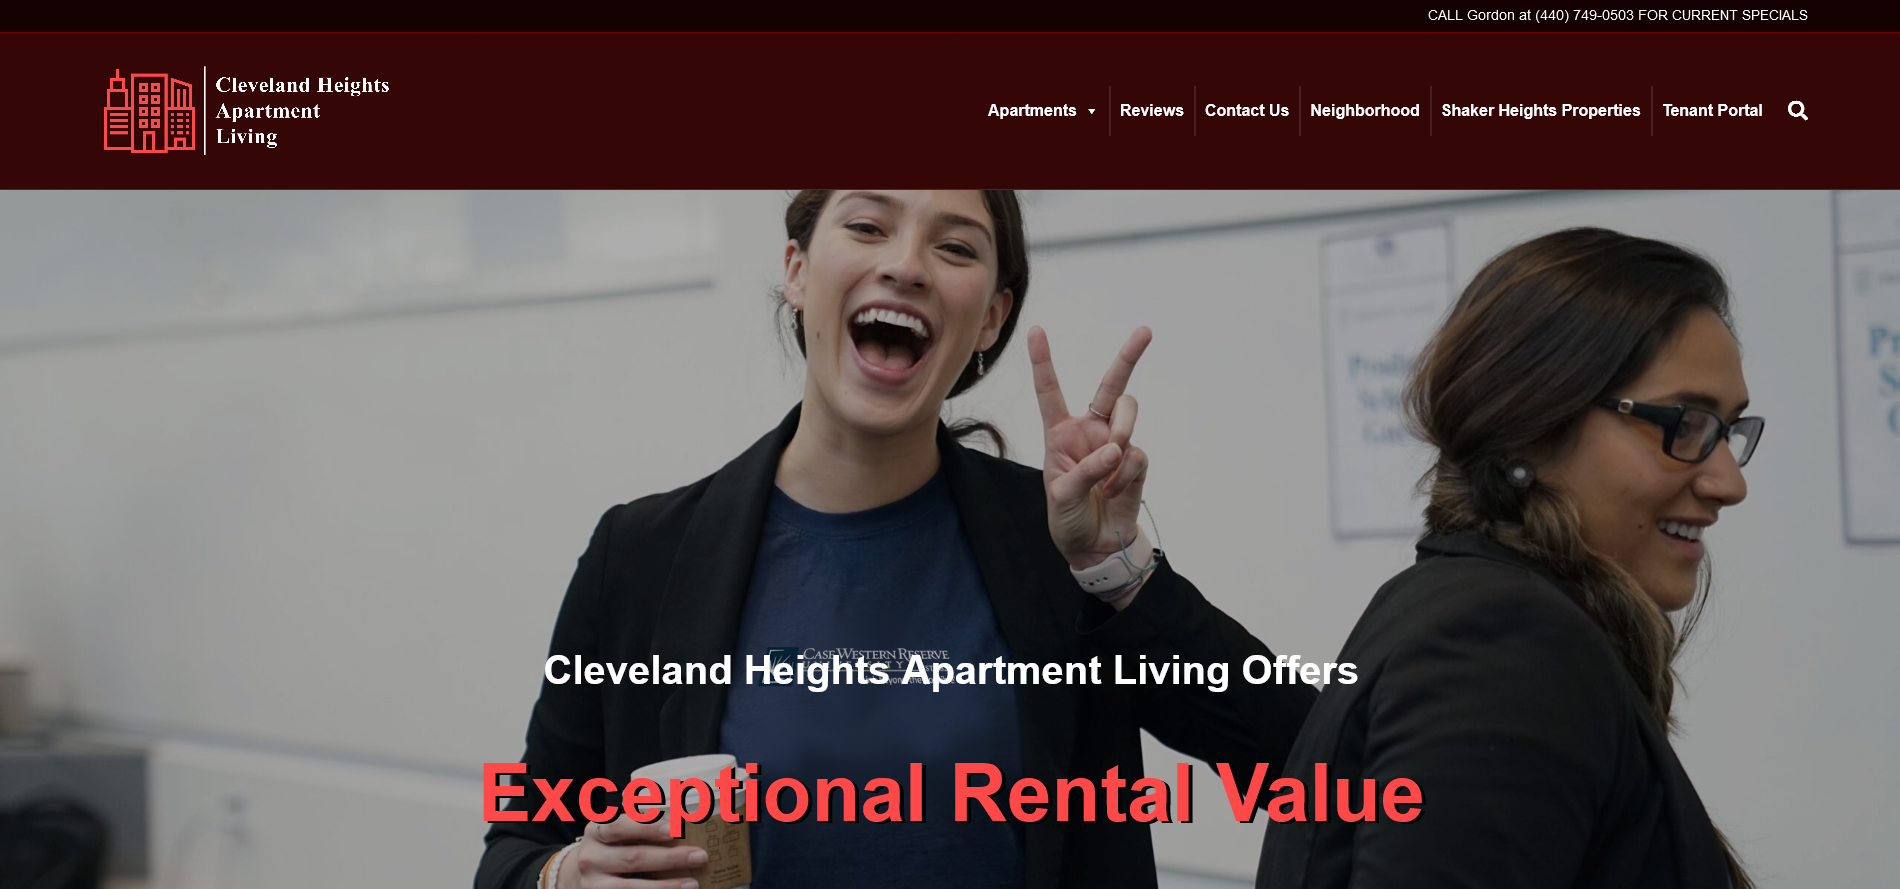 Cleveland Heights Apartment Living